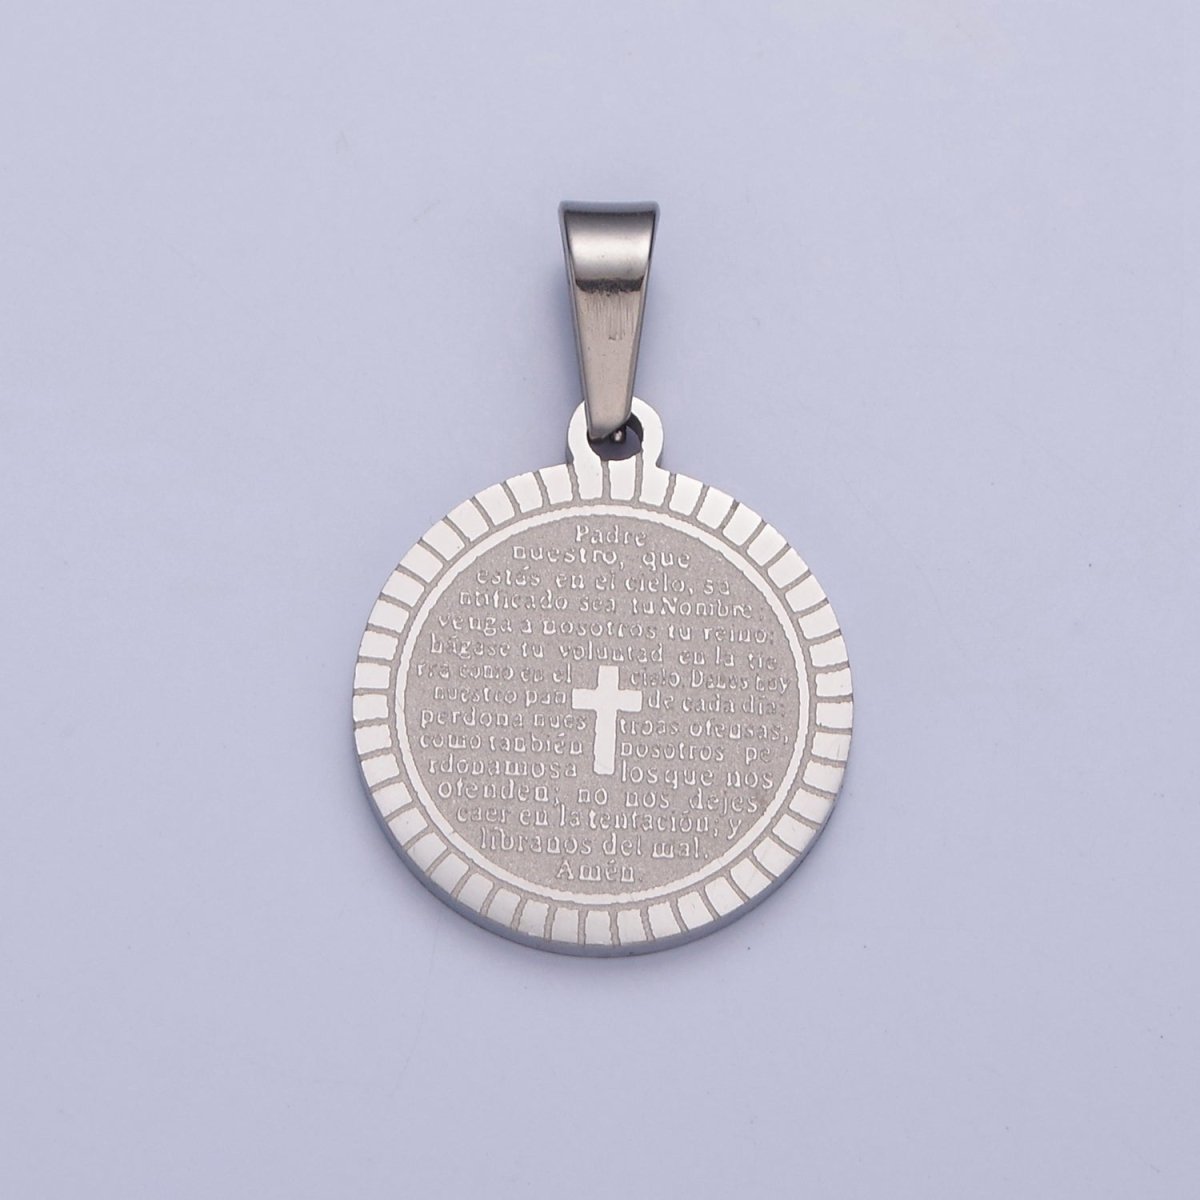 Stainless Steel Round Medallion, The Lord's Prayer in Spanish, Religious Cross in Silver & Gold I-439 I-444 - DLUXCA